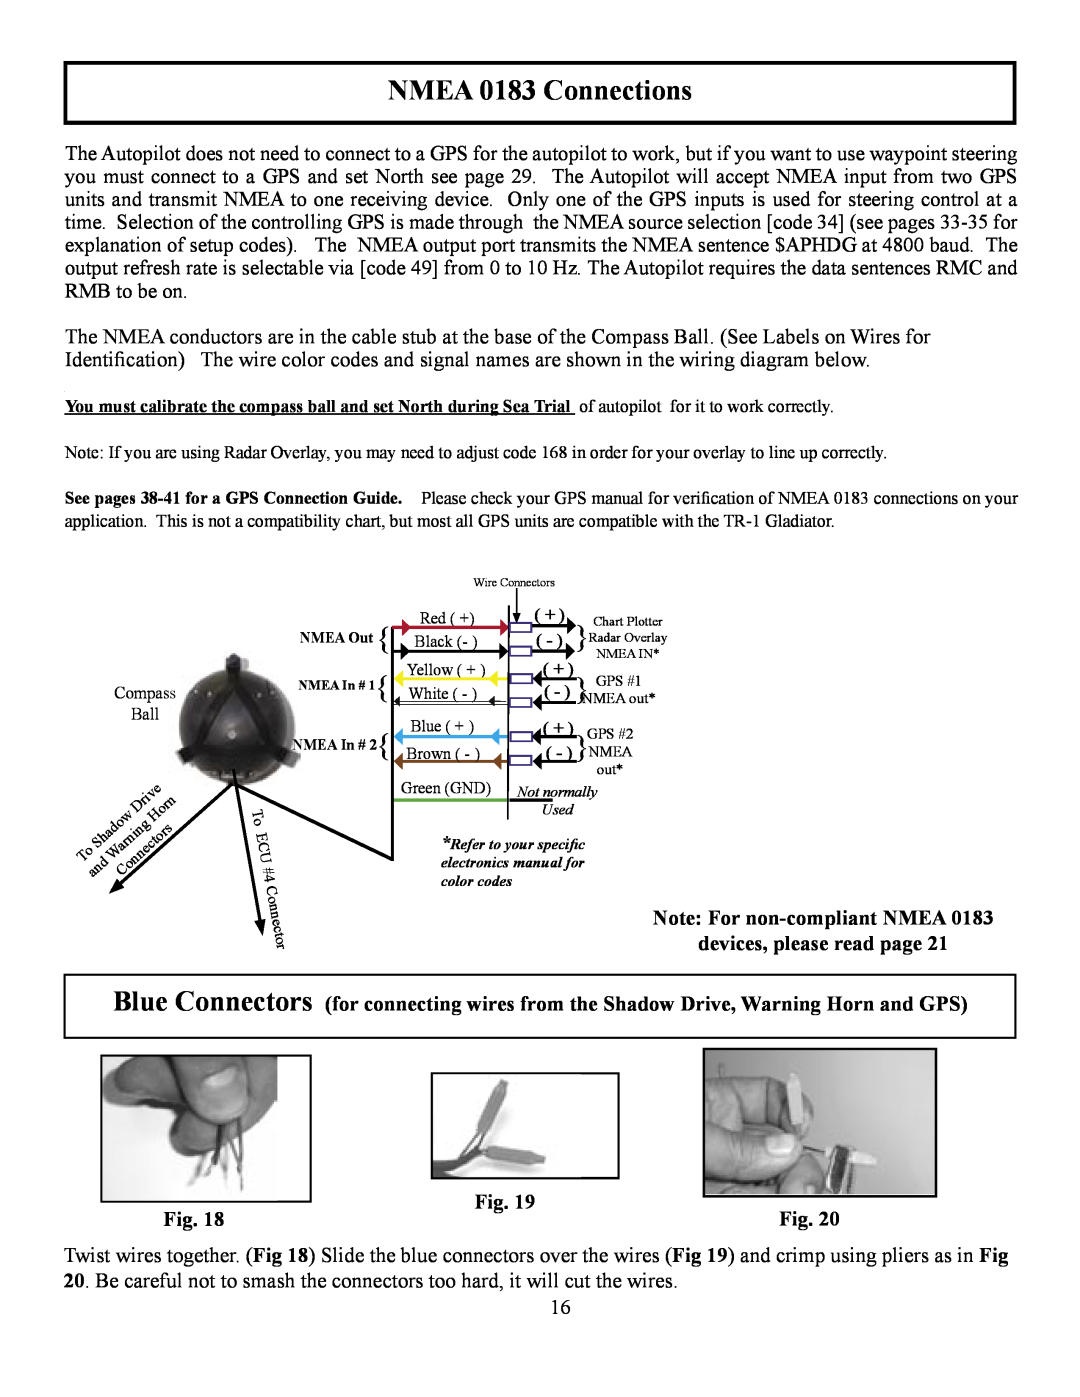 Garmin TR-1 manual NMEA 0183 Connections, Note For non-compliant NMEA, devices, please read page 